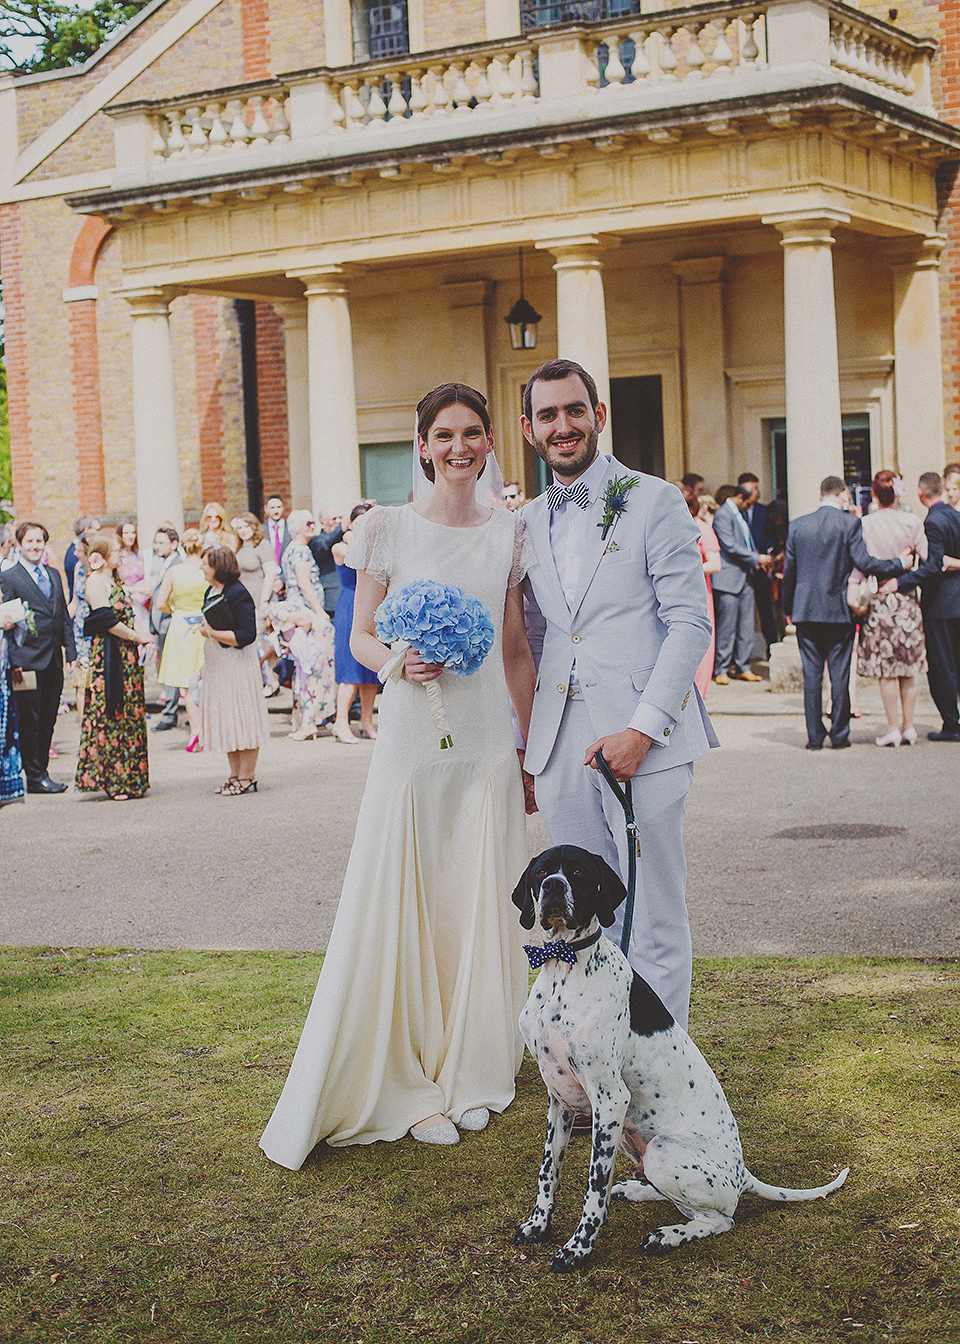 Bride Anna wore a Belle & Bunty gown that she purchased at Miss Bush Bridal of Surrey for her quirky London wedding. Photography by Howell Jones.